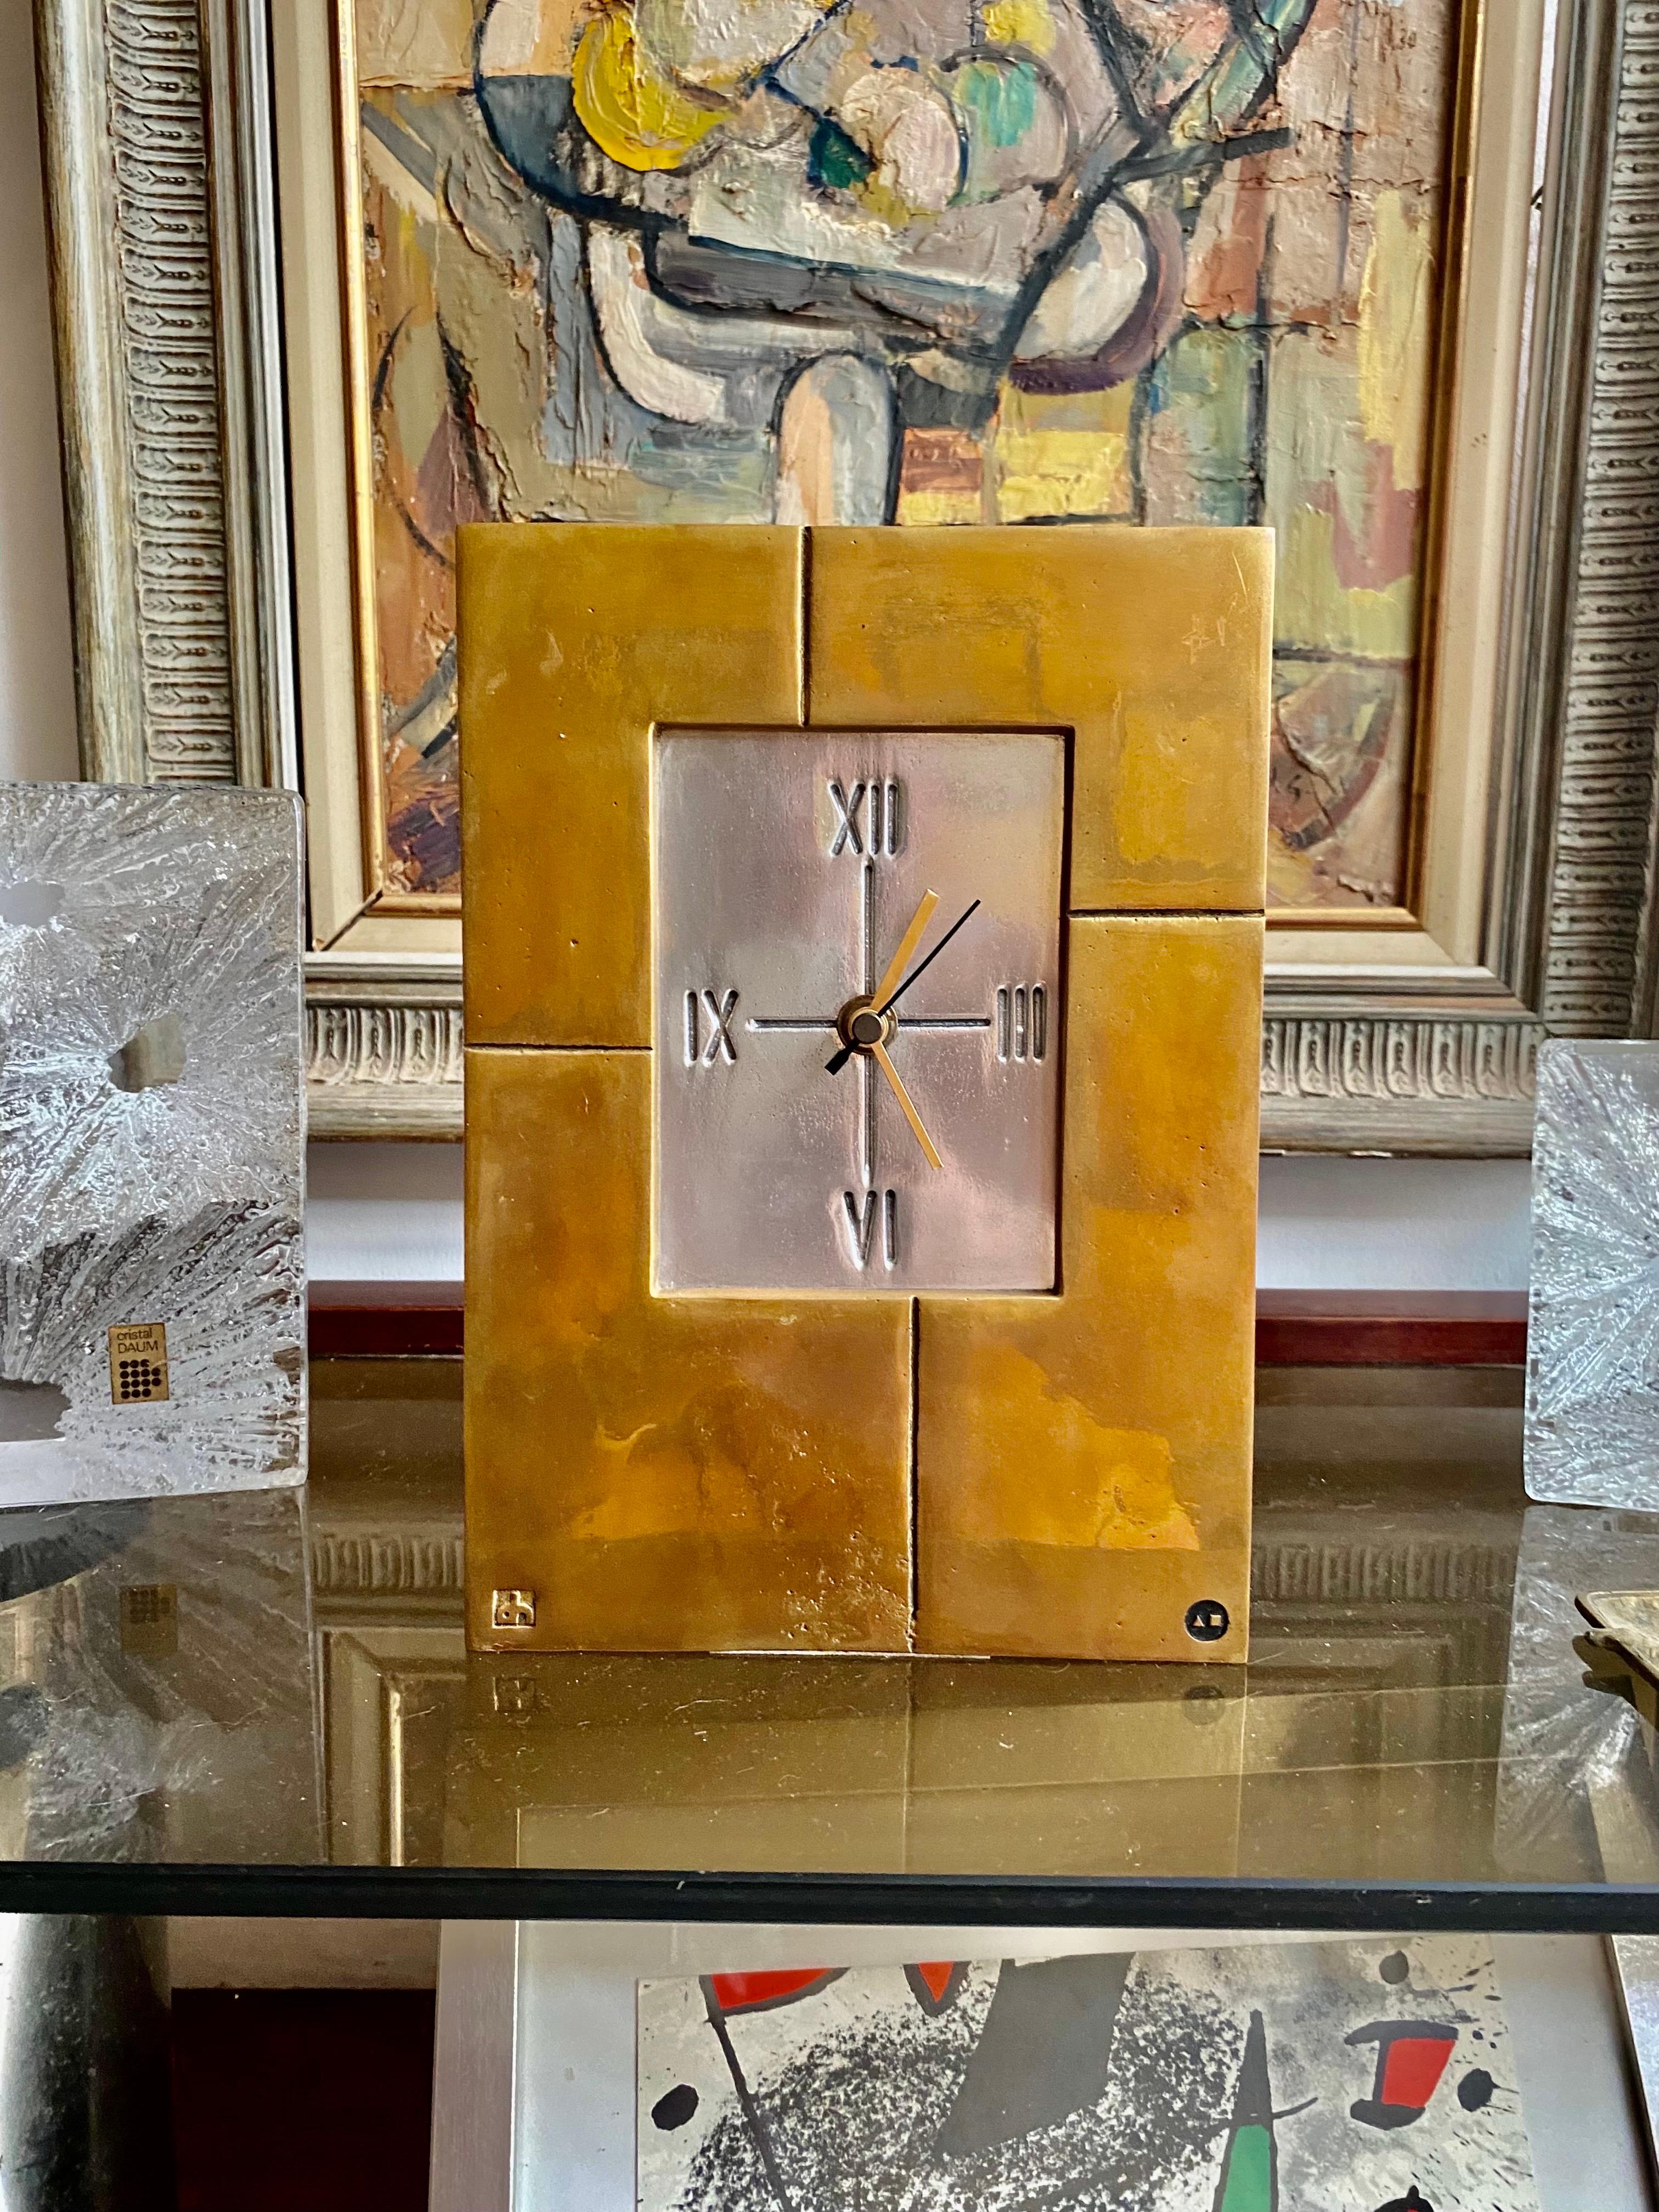 Clock sculpture in bronze and cast aluminum for the base by artist David Marshall.

Marshall moved to Spain in the mid-1960s, opening a workshop in Malaga in 1969 where he produced sculptures, jewelry, silverware and other accessories.
This clock